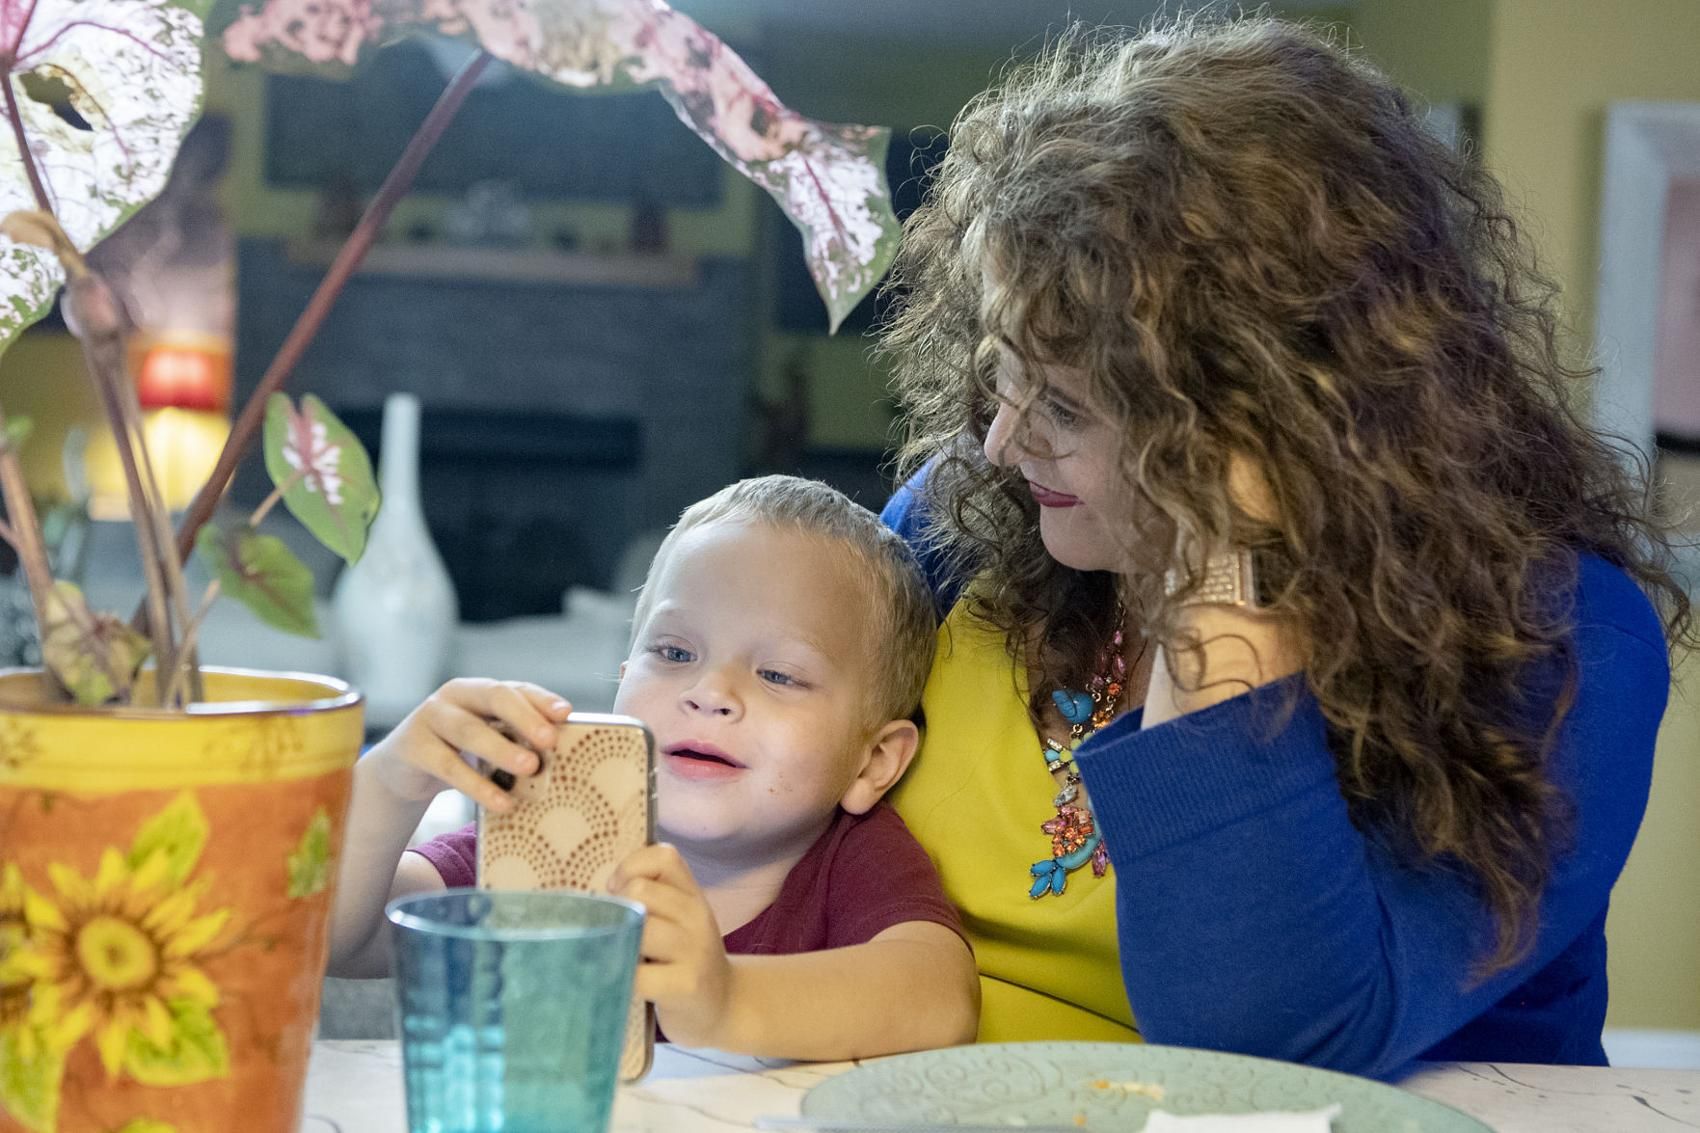 Crystal Camacho plays a game on her phone with her son, Elias, 4, at the kitchen table of their home in Swannanoa on June 30. Image by Angeli Wright/Asheville Citizen Times/North Carolina News Collaborative. United States, 2020.

